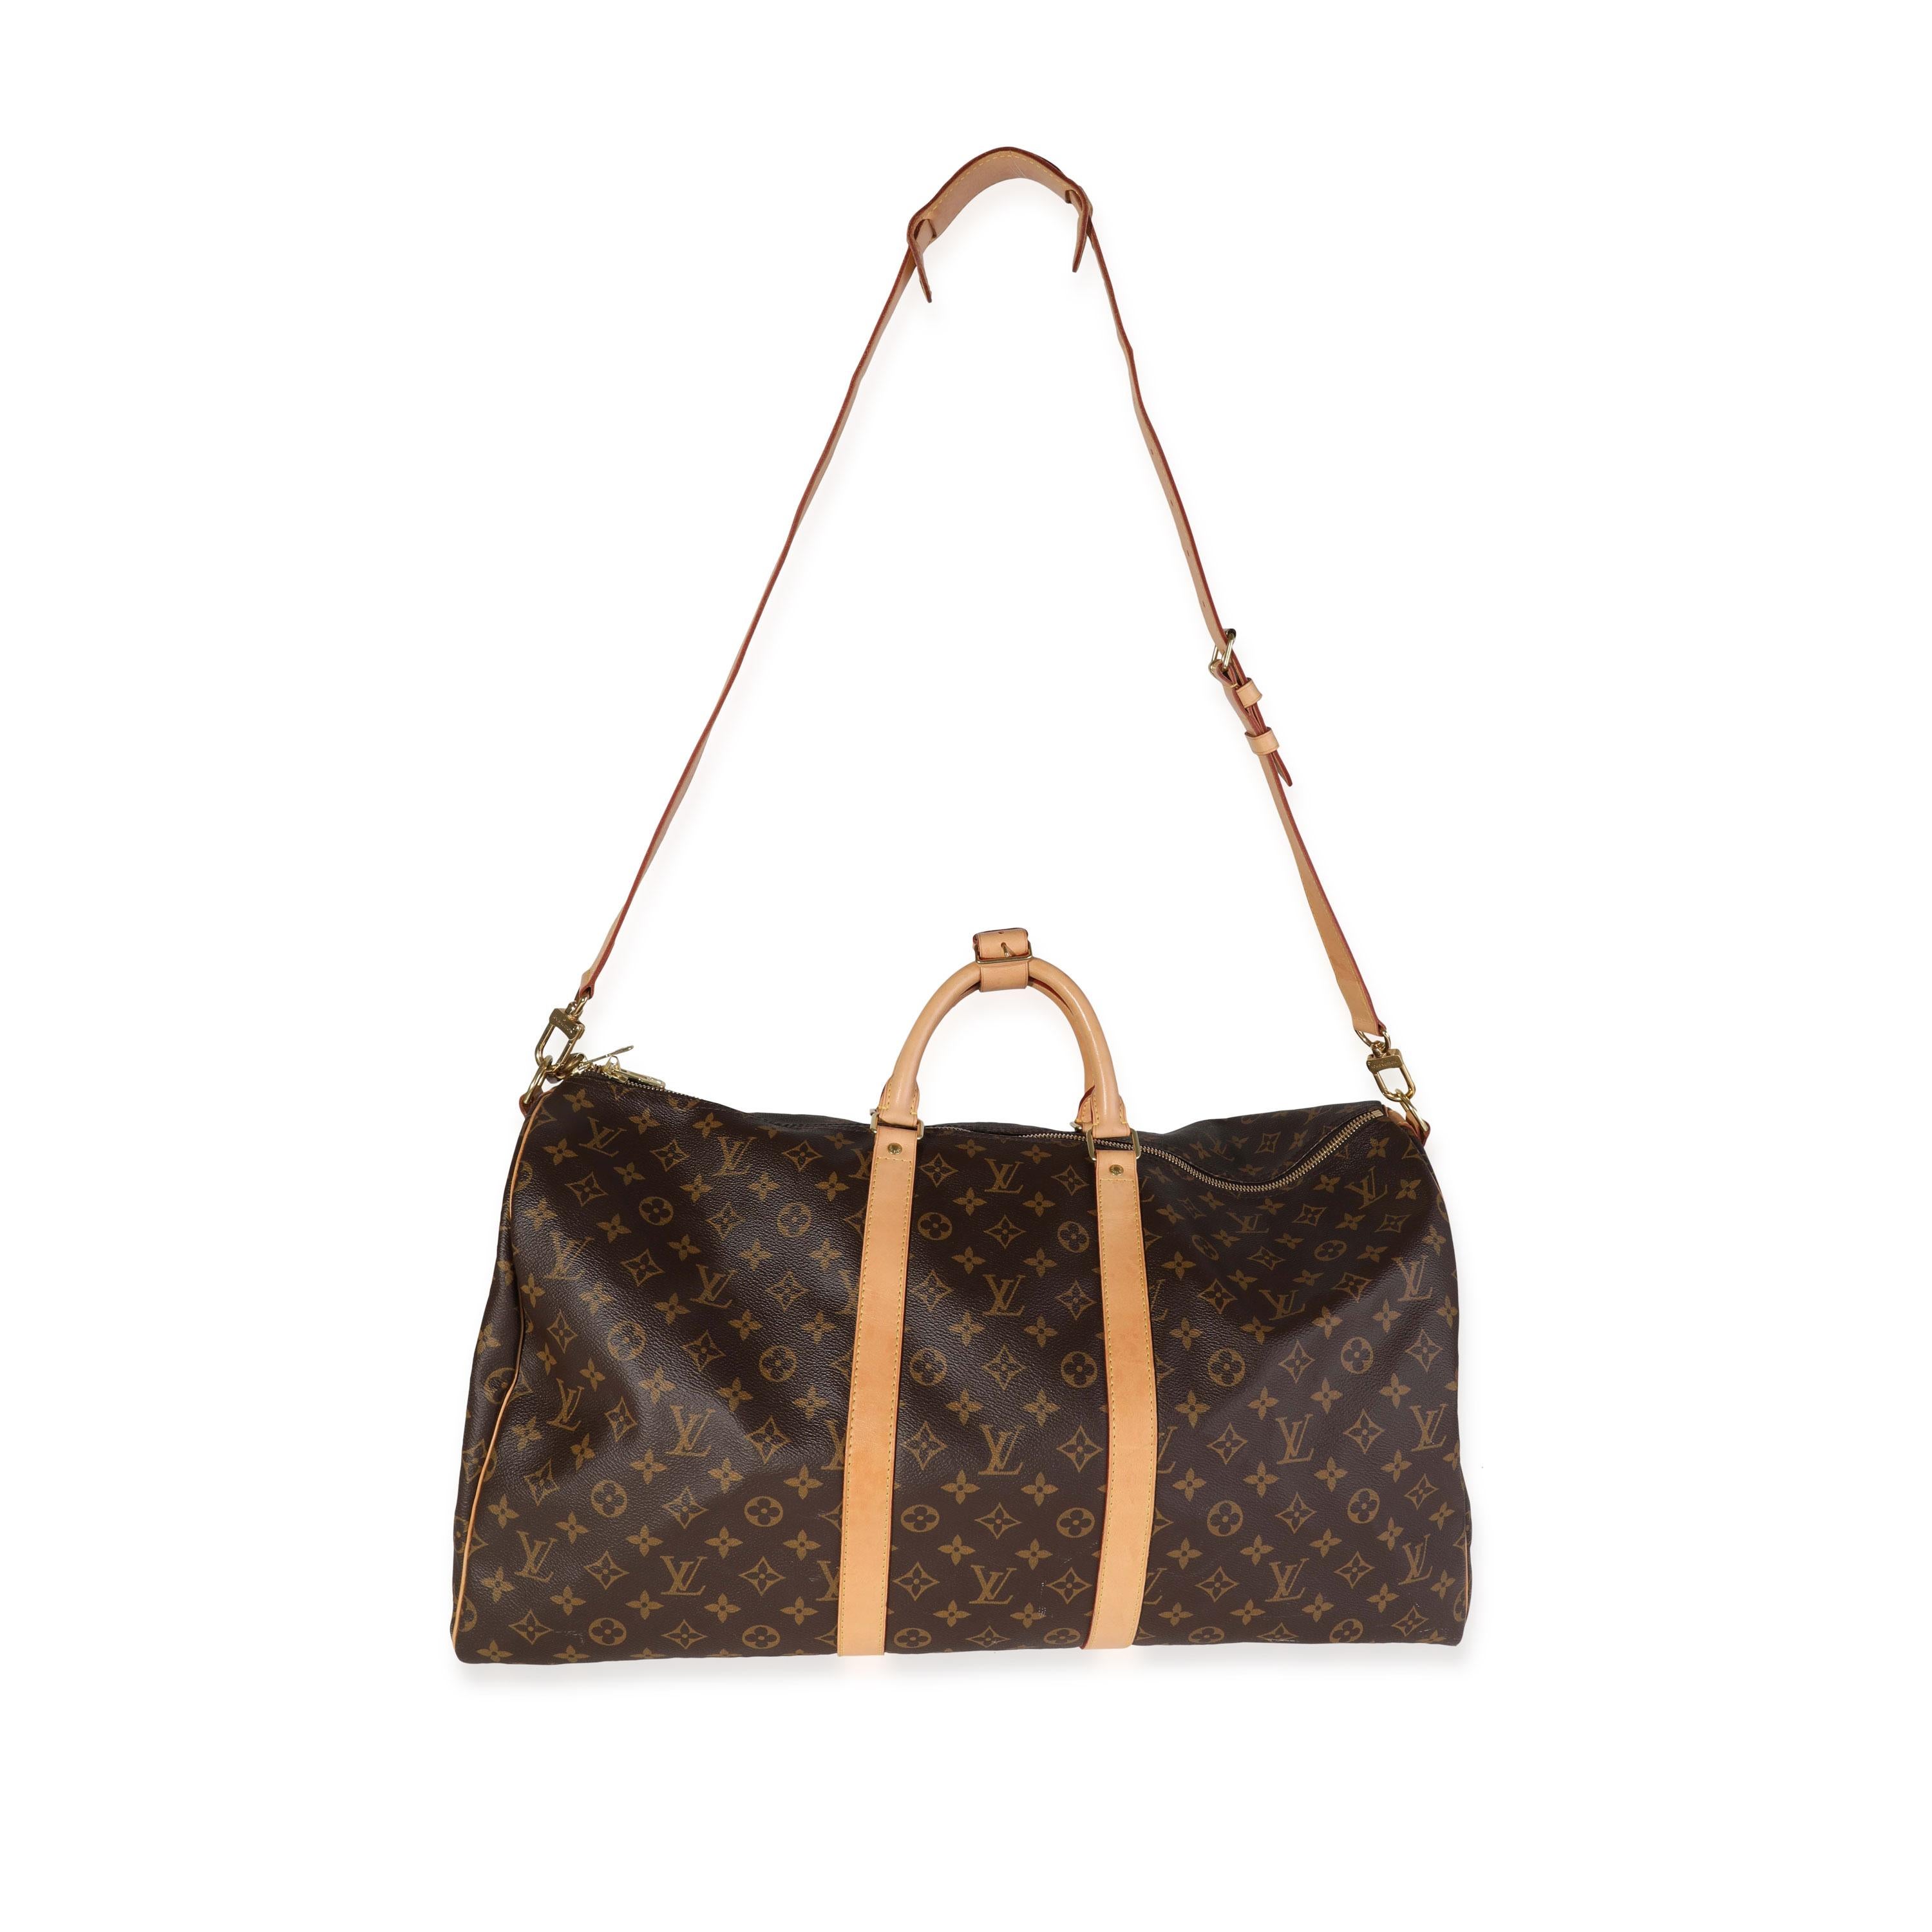 Listing Title: Louis Vuitton Monogram Canvas Keepall Bandoulière 55
SKU: 118399
MSRP: 2360.00
Condition: Pre-owned (3000)
Handbag Condition: Very Good
Condition Comments: Water marks on base. Normal Patina. Small stain on interior.
Brand: Louis